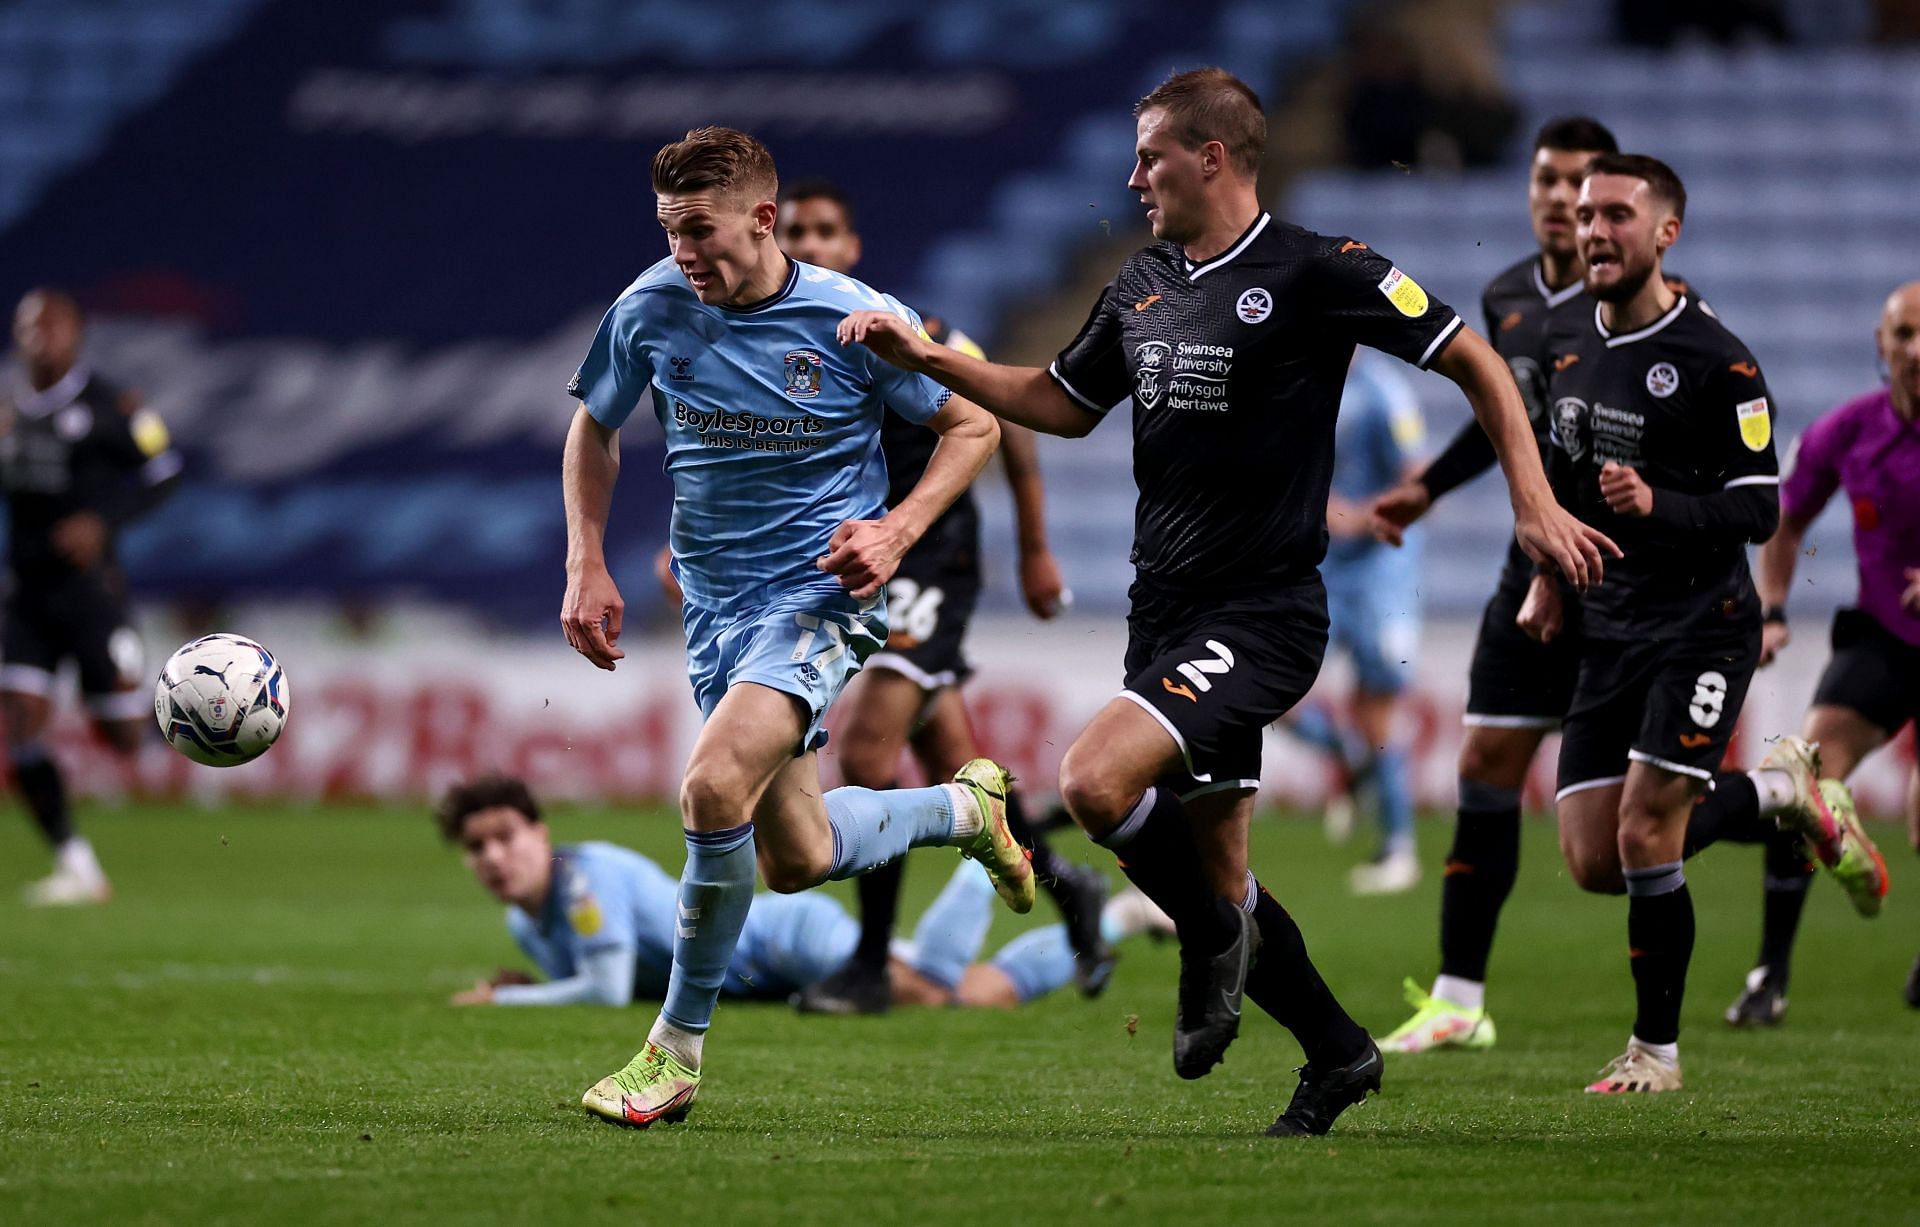 PREVIEW: Sky Blues host Cardiff tonight - News - Coventry City